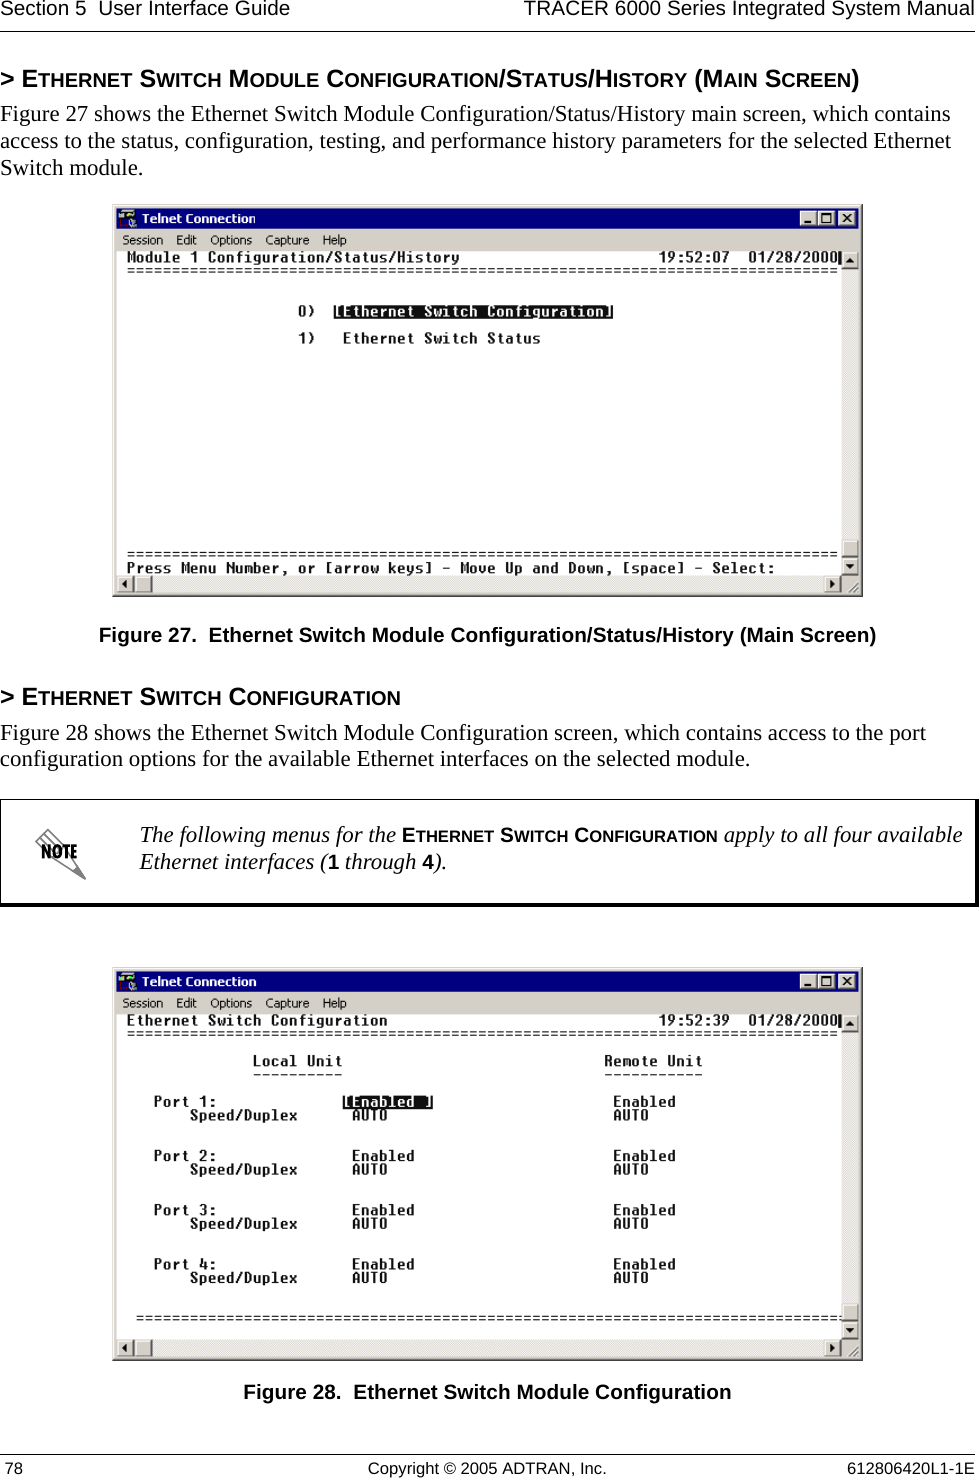 Section 5  User Interface Guide TRACER 6000 Series Integrated System Manual 78 Copyright © 2005 ADTRAN, Inc. 612806420L1-1E&gt; ETHERNET SWITCH MODULE CONFIGURATION/STATUS/HISTORY (MAIN SCREEN)Figure 27 shows the Ethernet Switch Module Configuration/Status/History main screen, which contains access to the status, configuration, testing, and performance history parameters for the selected Ethernet Switch module.Figure 27.  Ethernet Switch Module Configuration/Status/History (Main Screen)&gt; ETHERNET SWITCH CONFIGURATIONFigure 28 shows the Ethernet Switch Module Configuration screen, which contains access to the port configuration options for the available Ethernet interfaces on the selected module.Figure 28.  Ethernet Switch Module ConfigurationThe following menus for the ETHERNET SWITCH CONFIGURATION apply to all four available Ethernet interfaces (1 through 4).